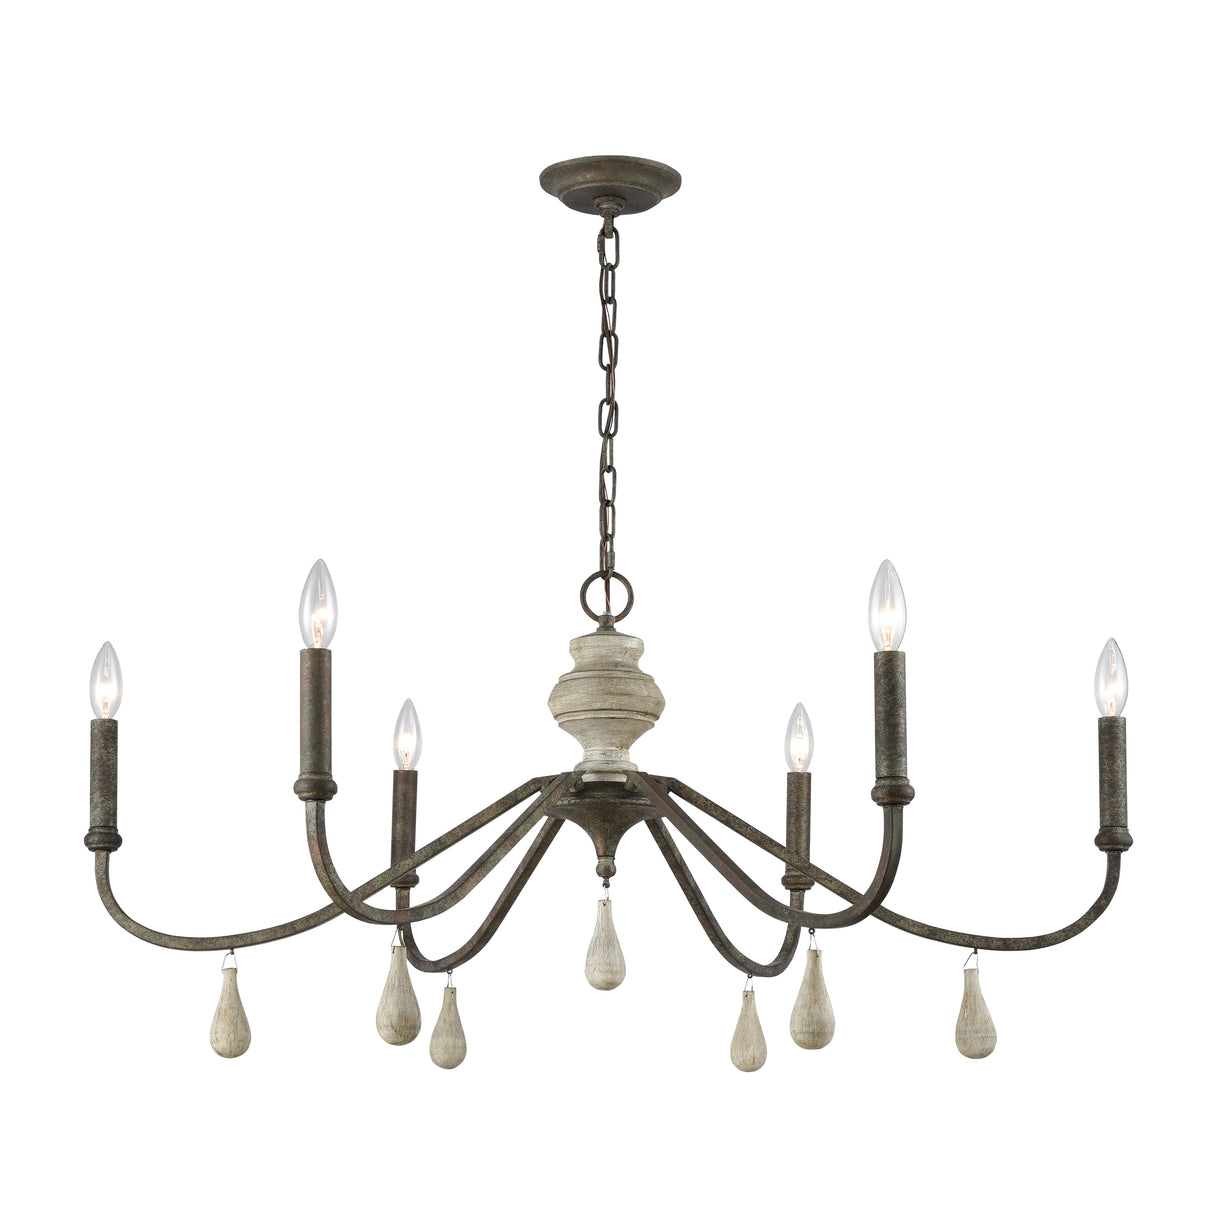 Elk D3871 French Connection 38'' Wide 6-Light Chandelier - Malted Rust